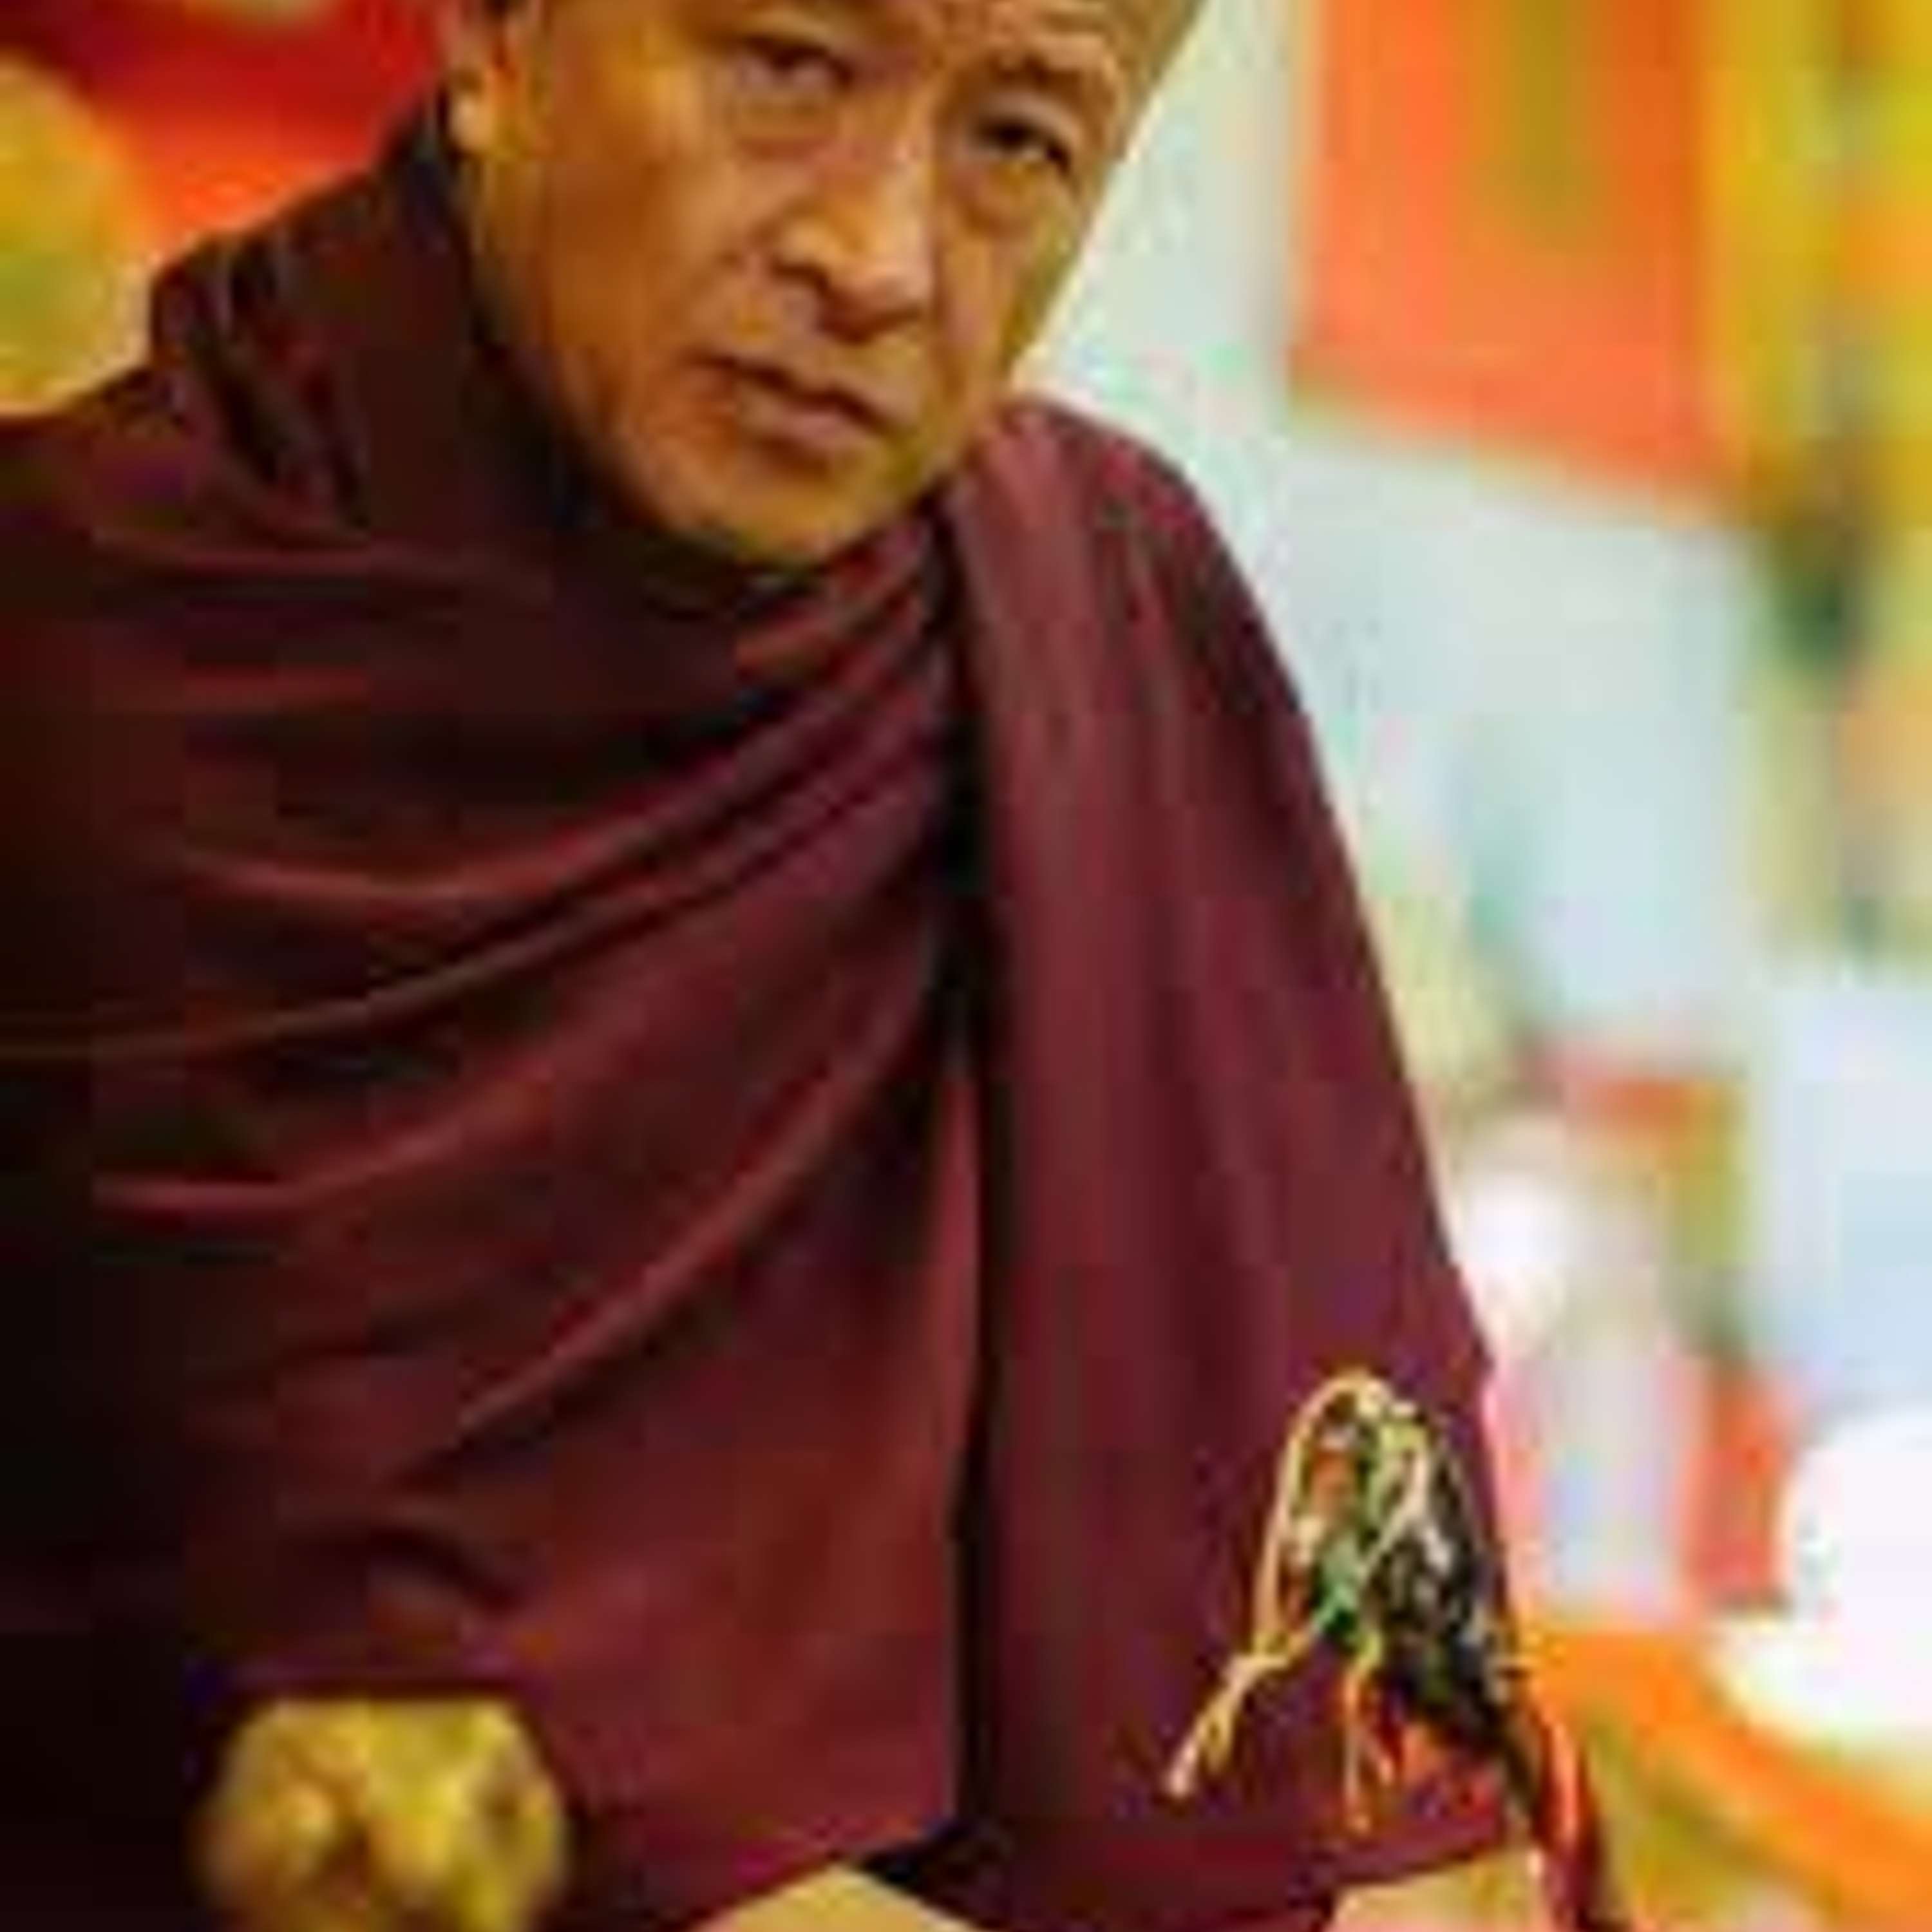 Episode 188: Interview with Bhutanese lama Dzongsar Khyentse Rinpoche...offering a distinctive Buddhist outlook on current environmental crises.